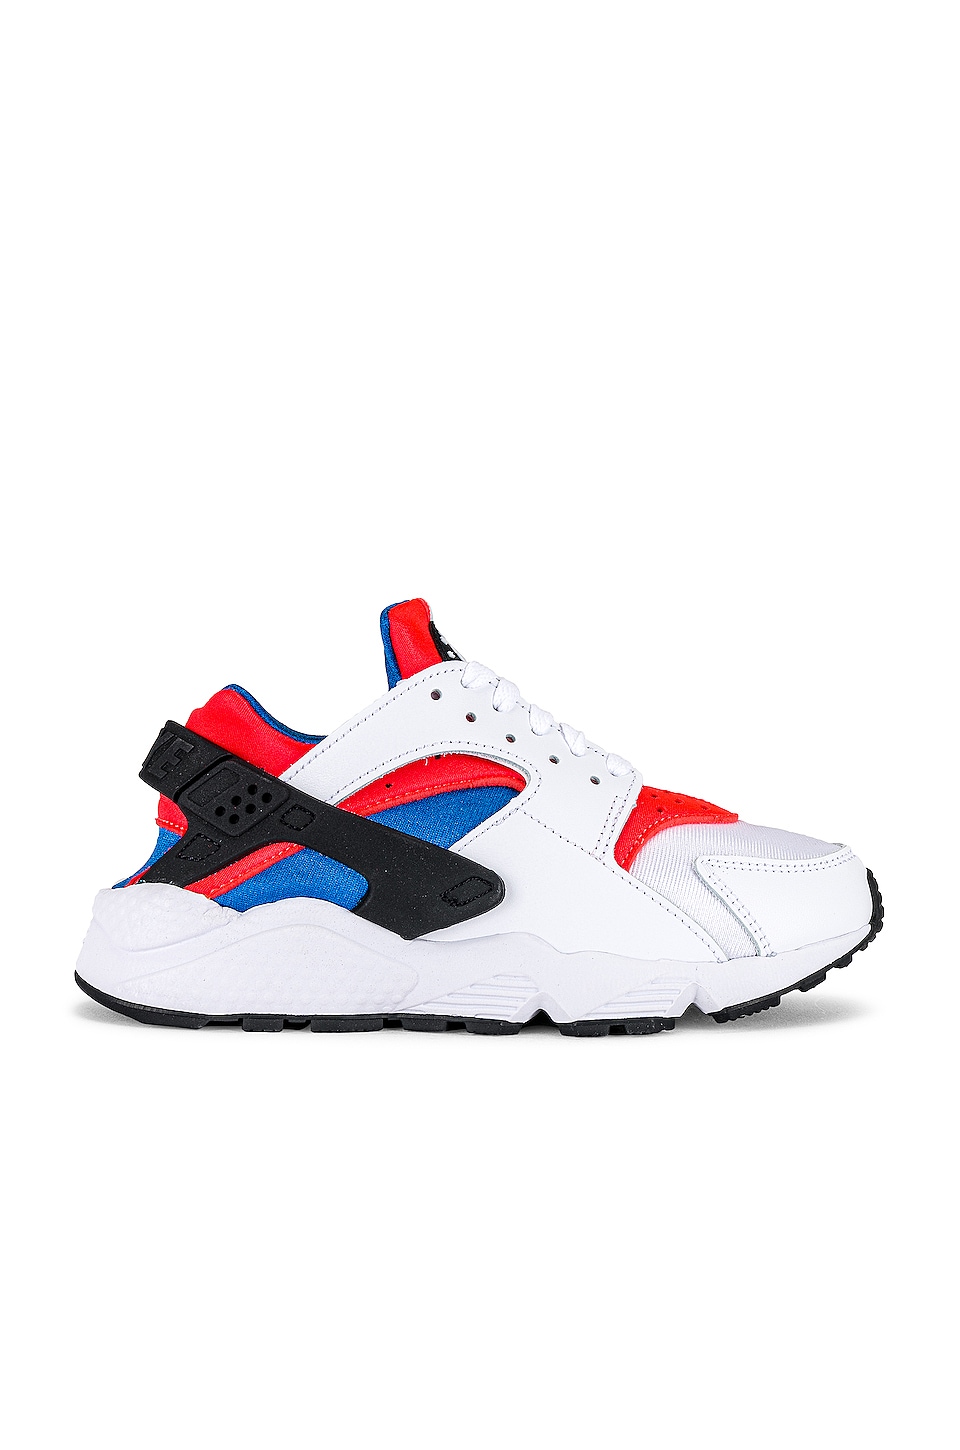 what happened to huaraches